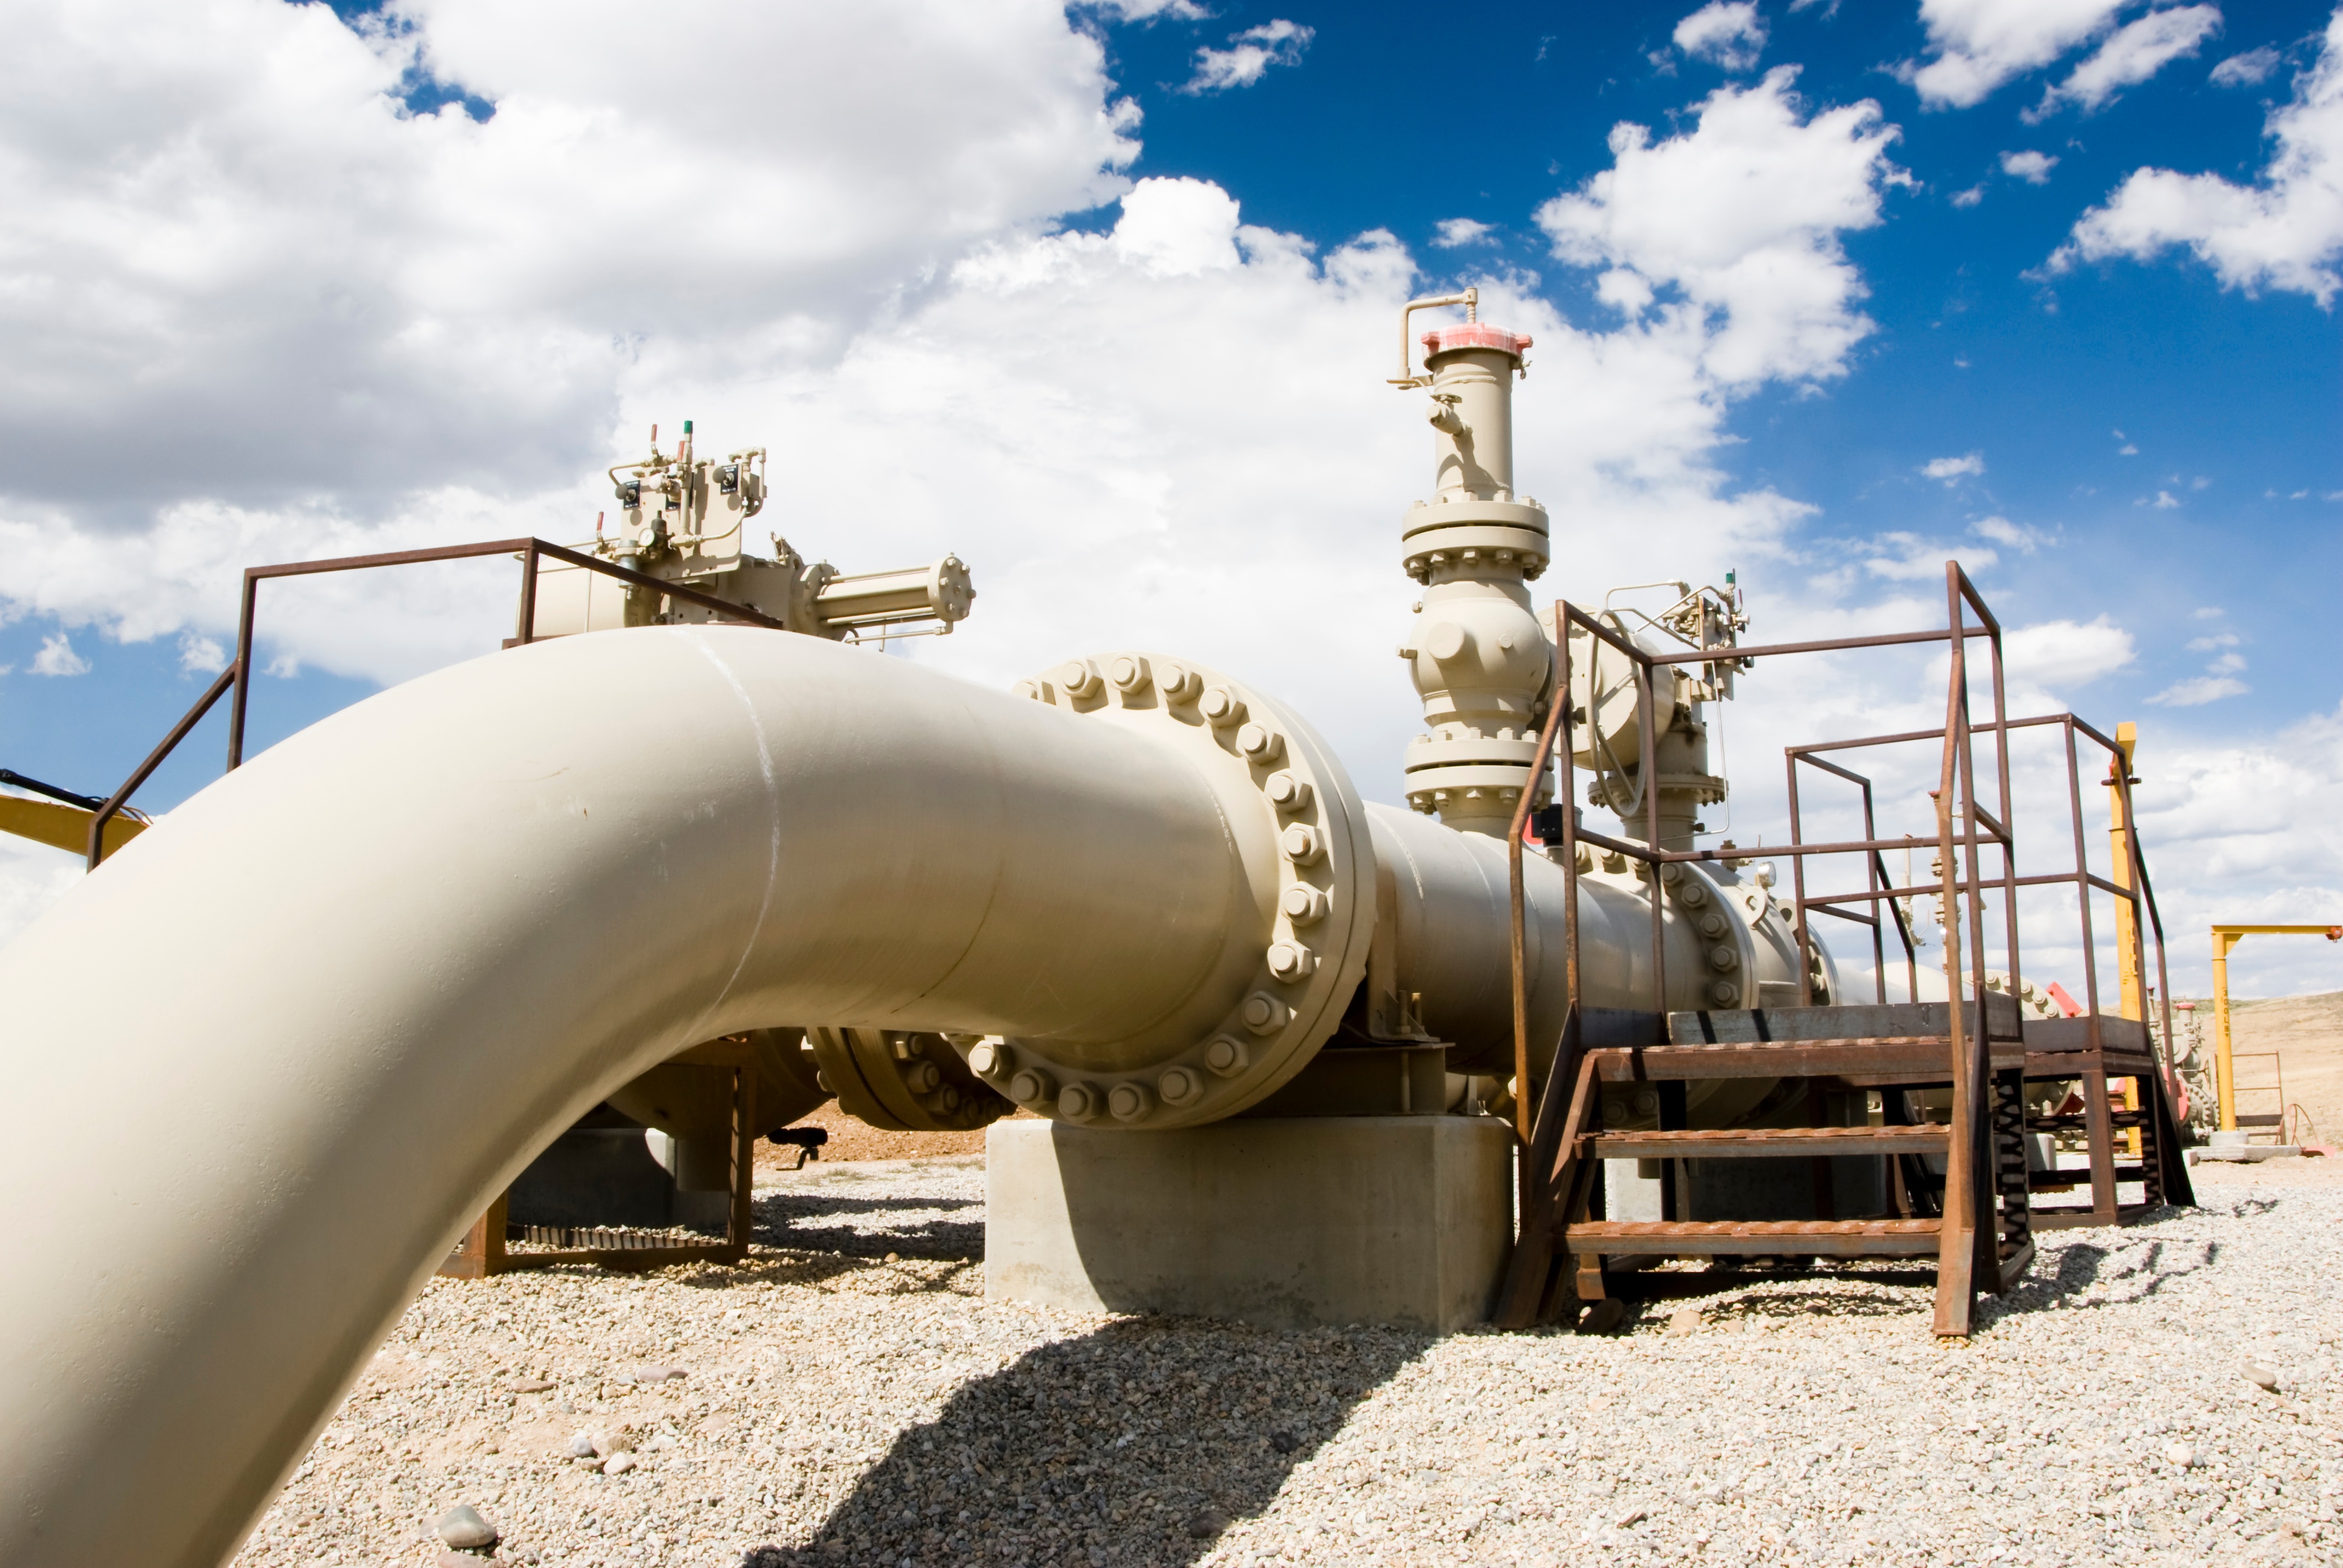 AX_CORP_AdobeStock_Gas_Pipeline_IM_9091577_Preview.jpeg